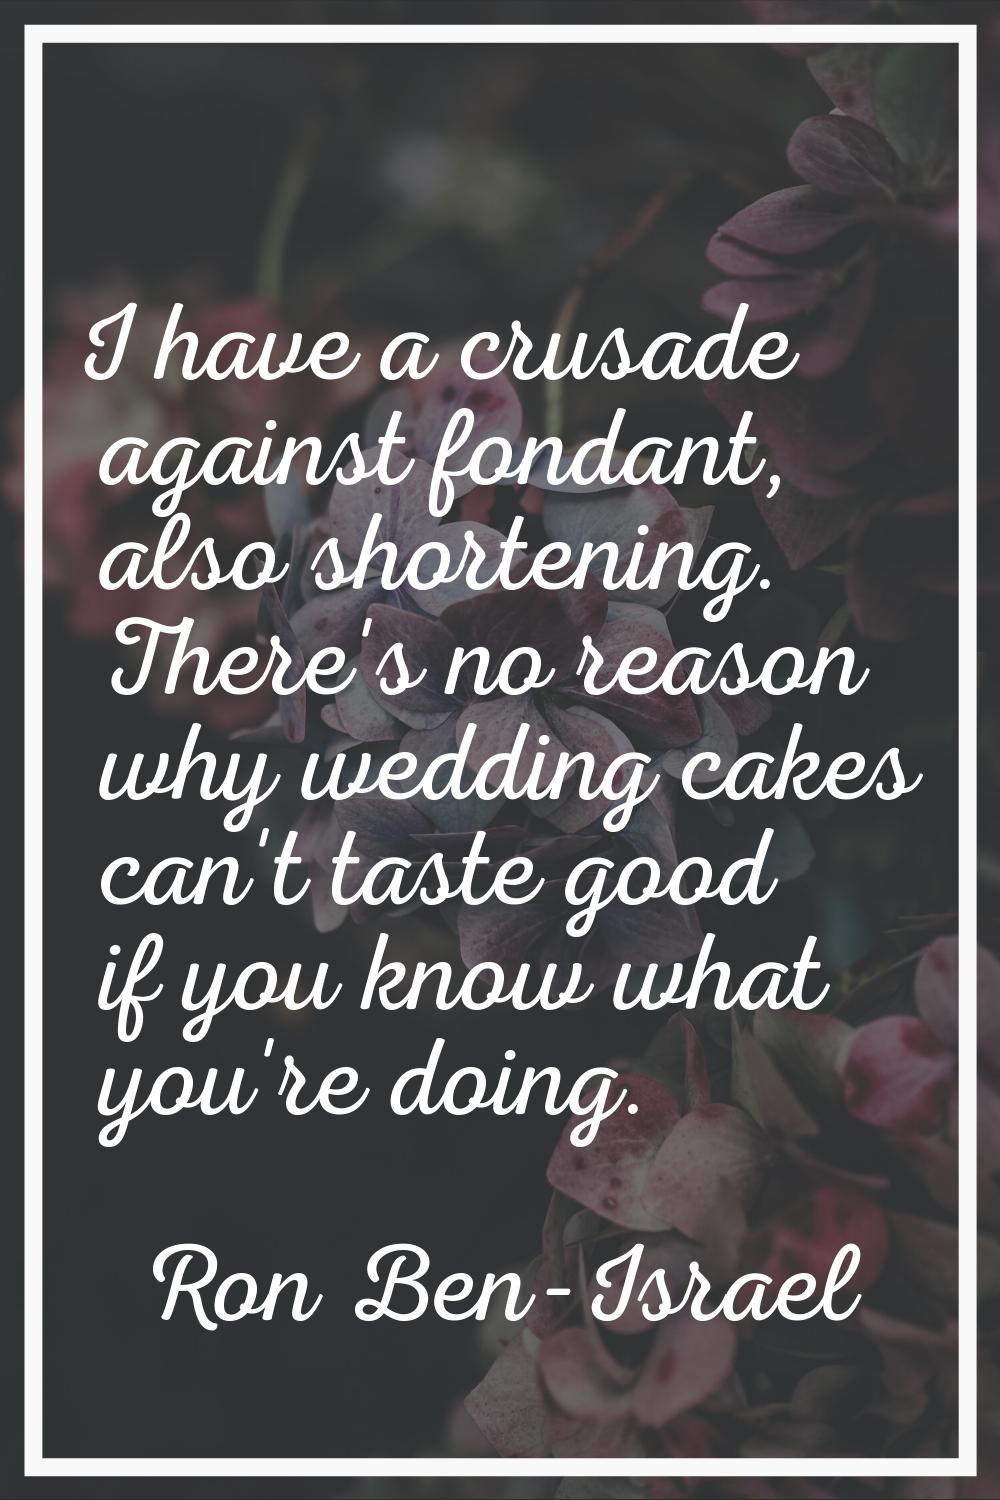 I have a crusade against fondant, also shortening. There's no reason why wedding cakes can't taste 